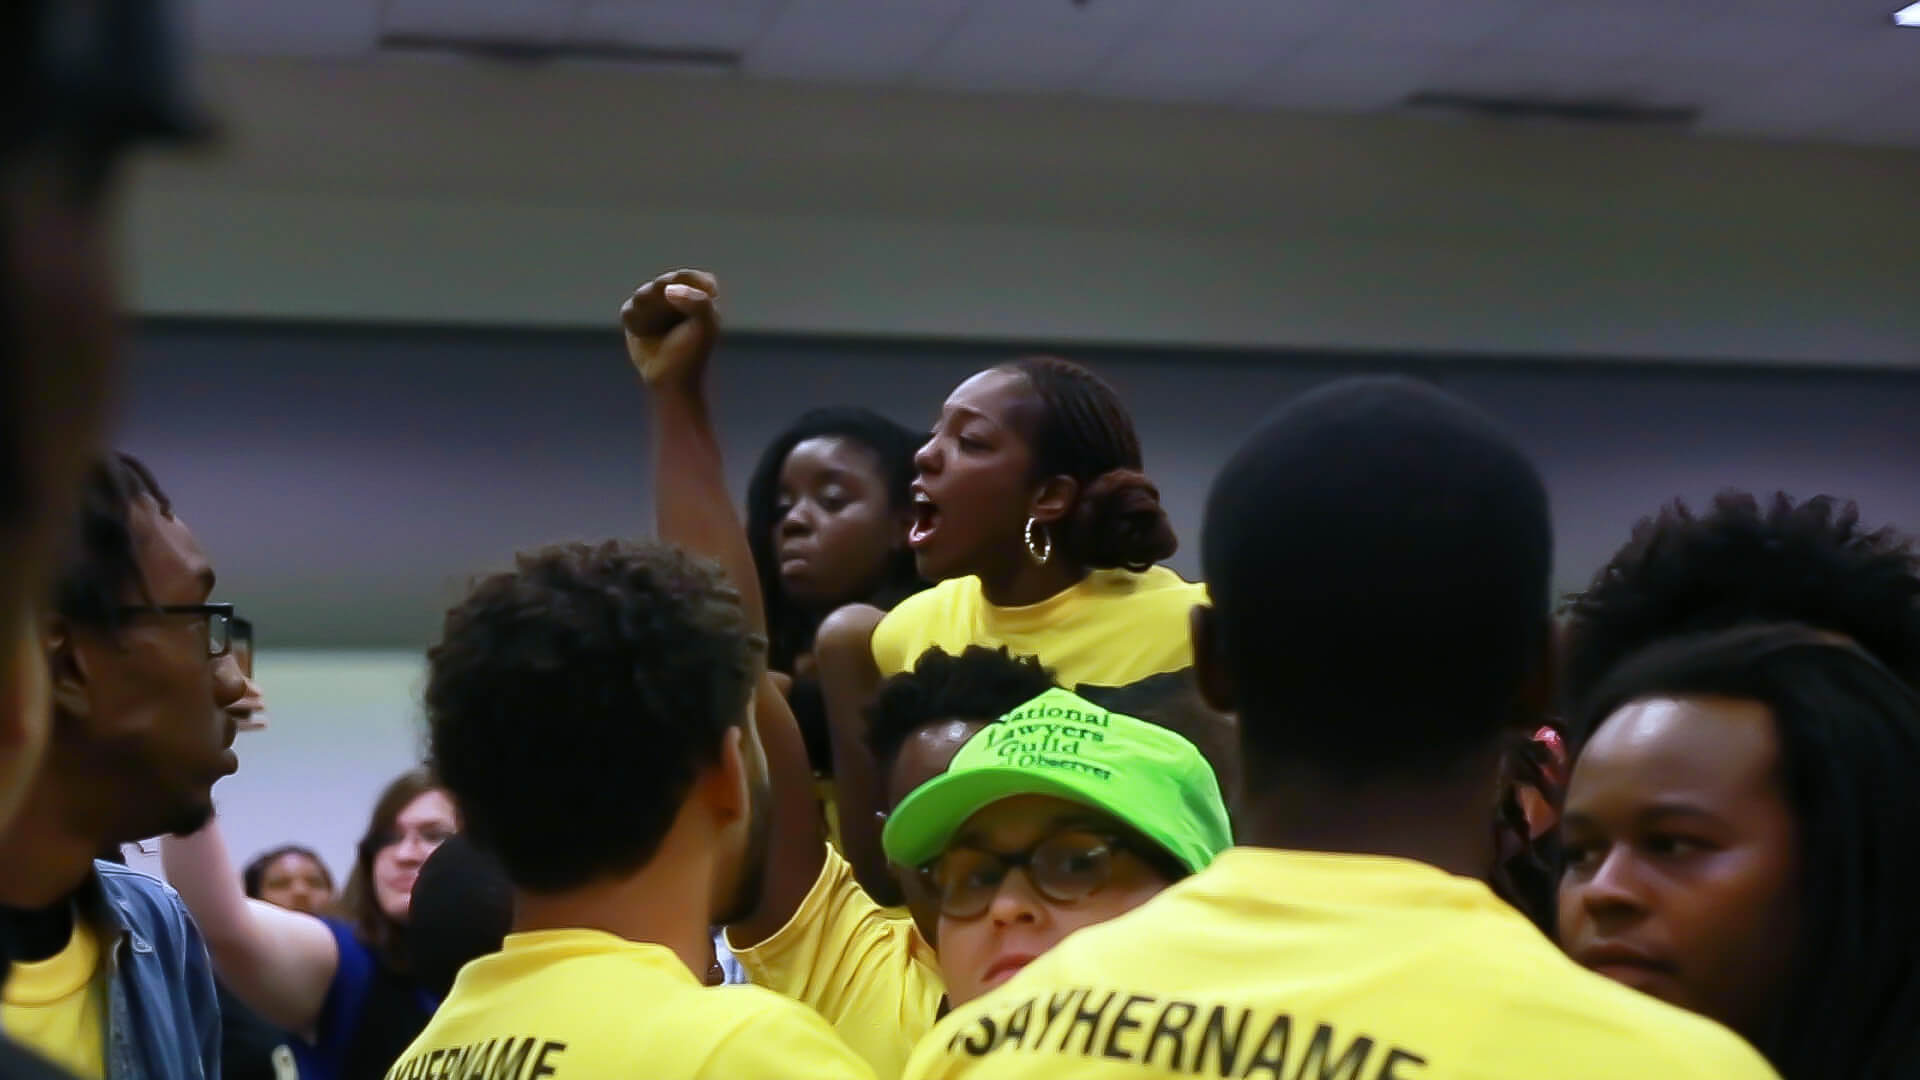 Still from Unapologetic. People gathered, wearing yellow shirts, and one of them has their fist up in the air. A woman stands out from the crowd.